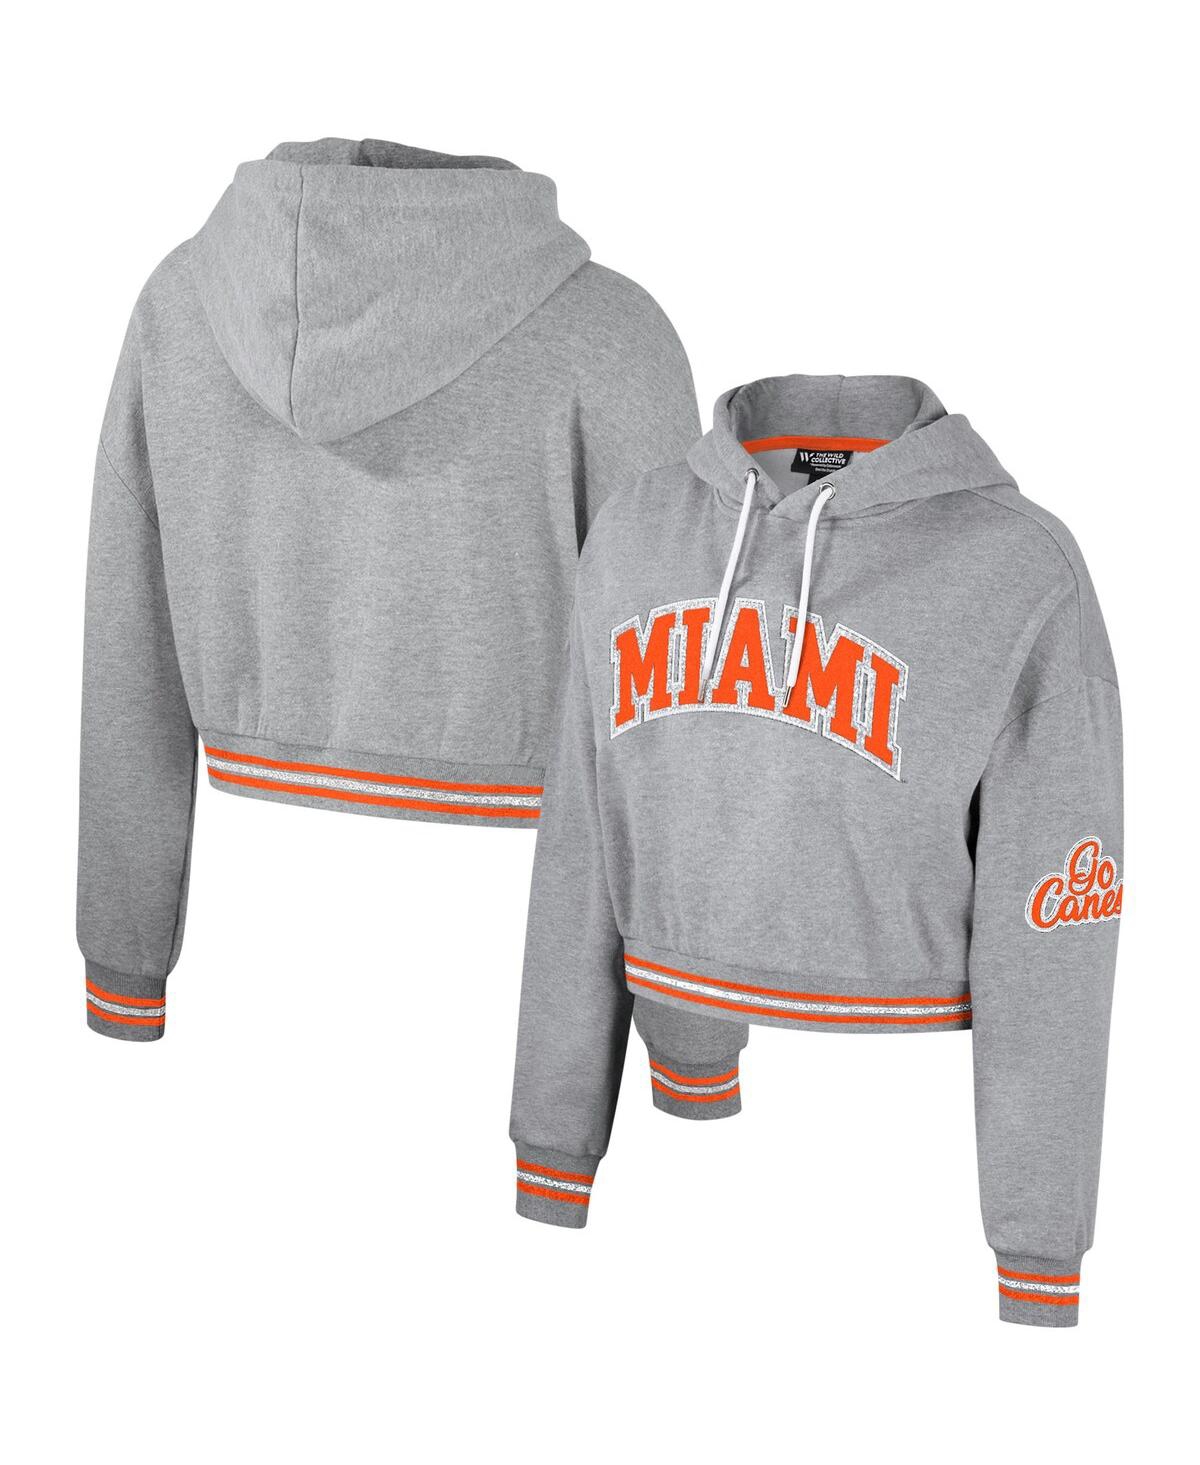 Women's The Wild Collective Heather Gray Distressed Miami Hurricanes Cropped Shimmer Pullover Hoodie - Heather Gray